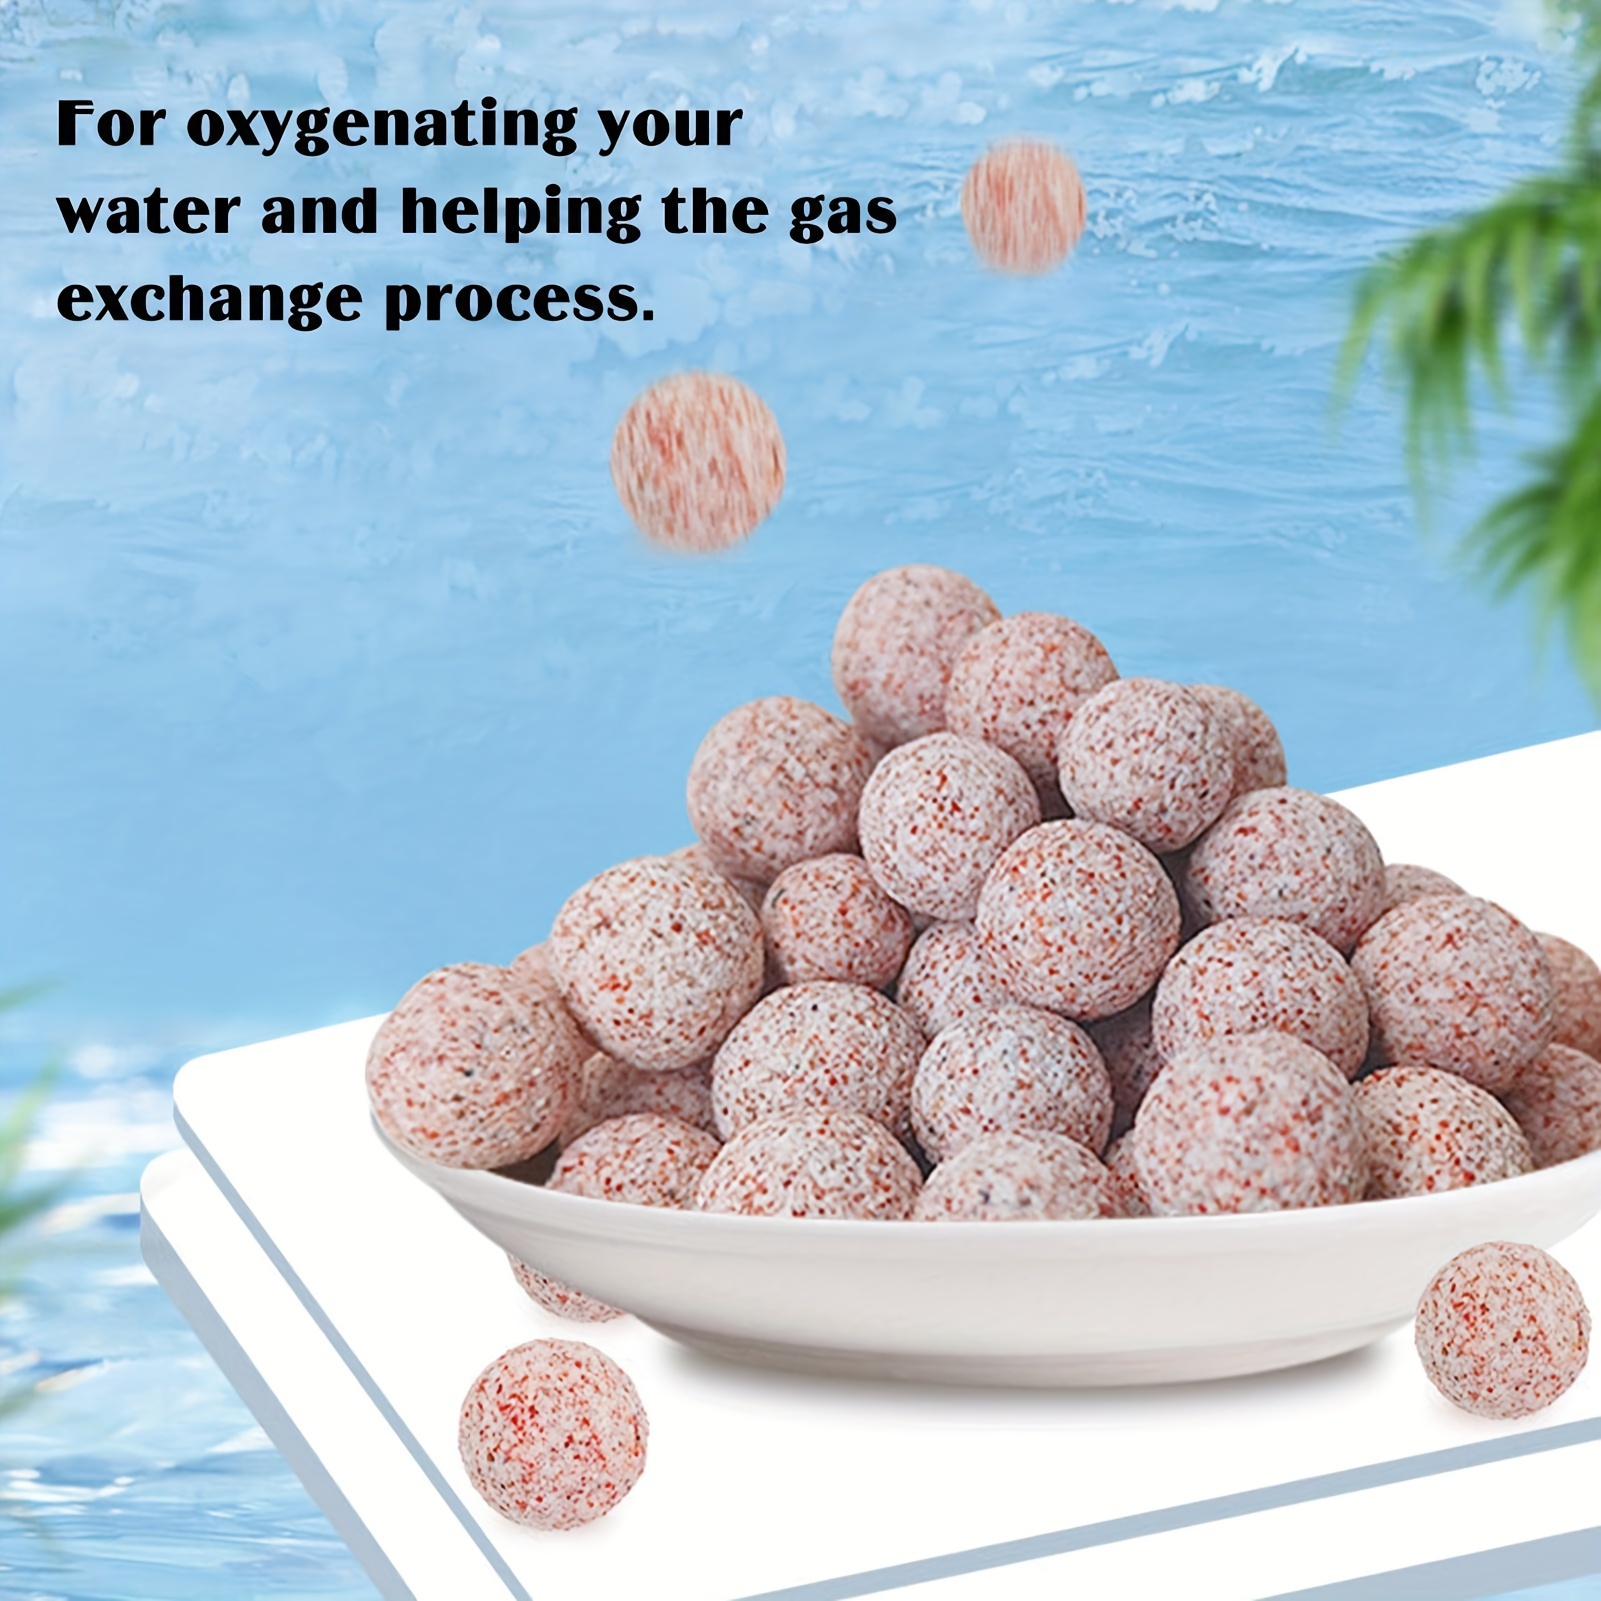 

500g Nano Hollow Quartz Balls Suitable For Fish Tank Filter Material, Bacterial Balls, Fish Tank Filter, Nitrifying Bacteria, And Nitrate Removal